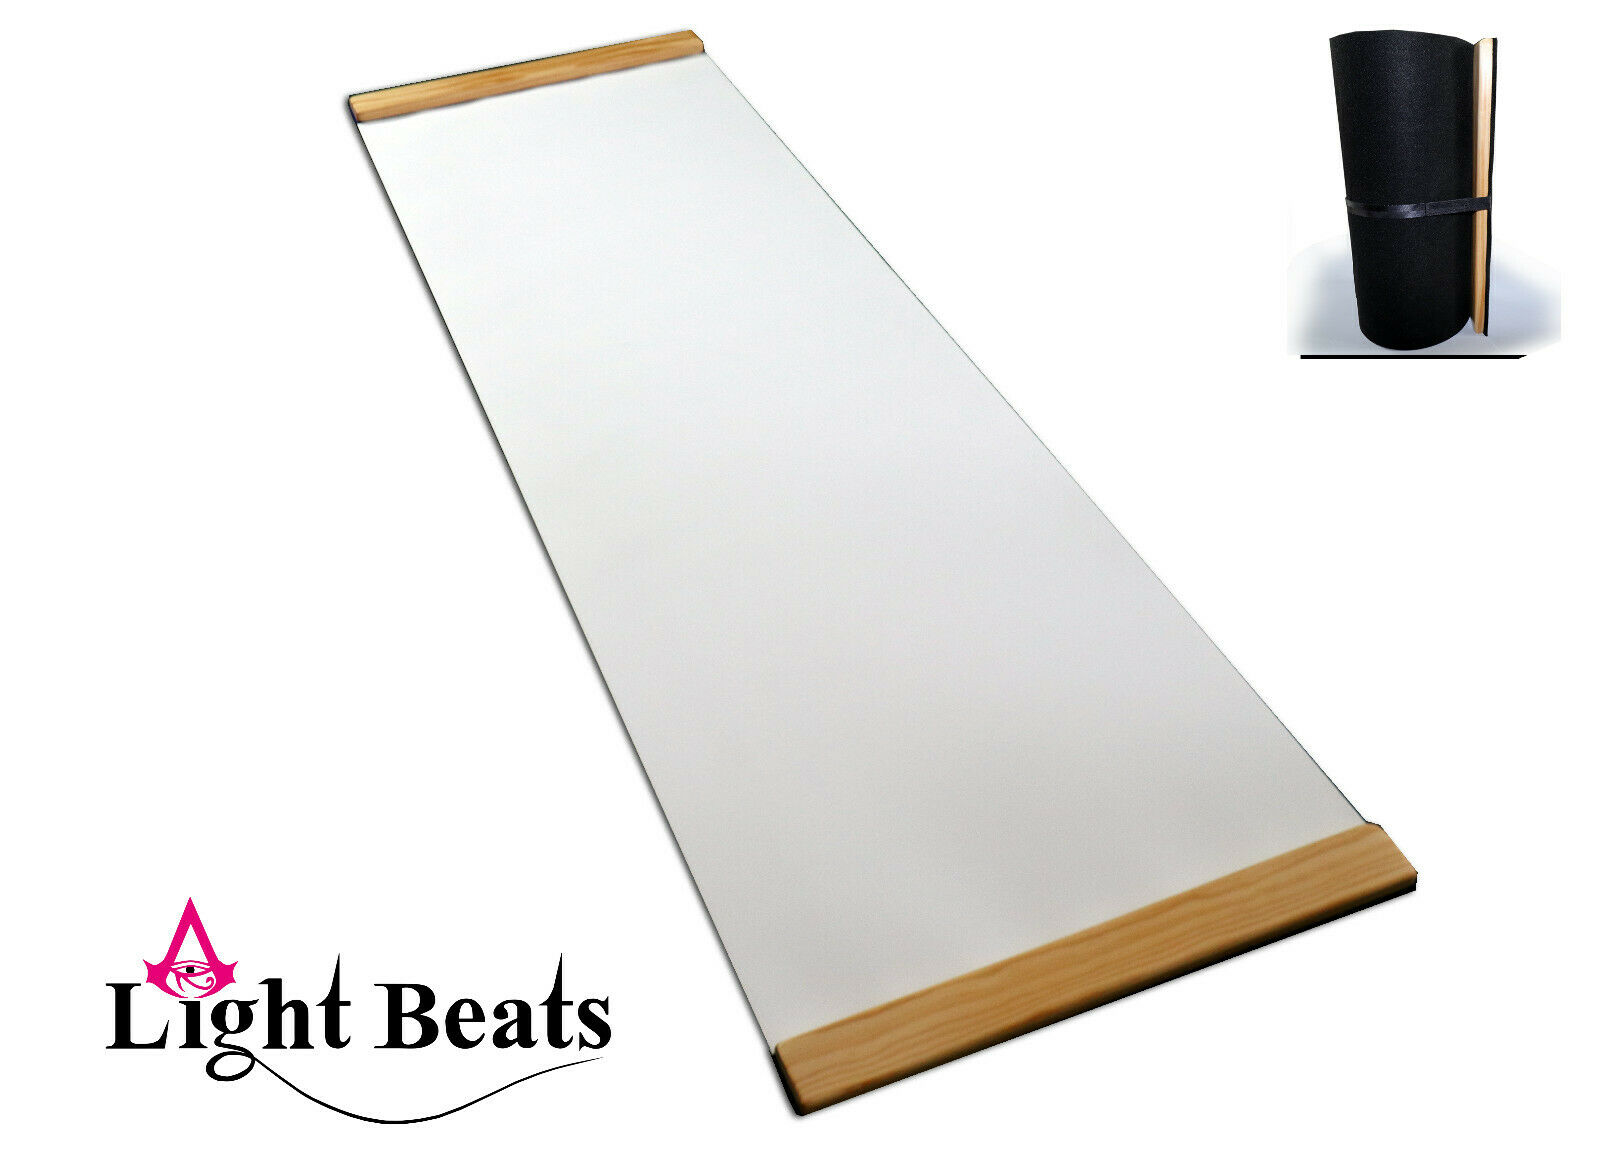 3g Ultimate - Slide Board 6ft X 2ft New With Nano Buffed Surface!